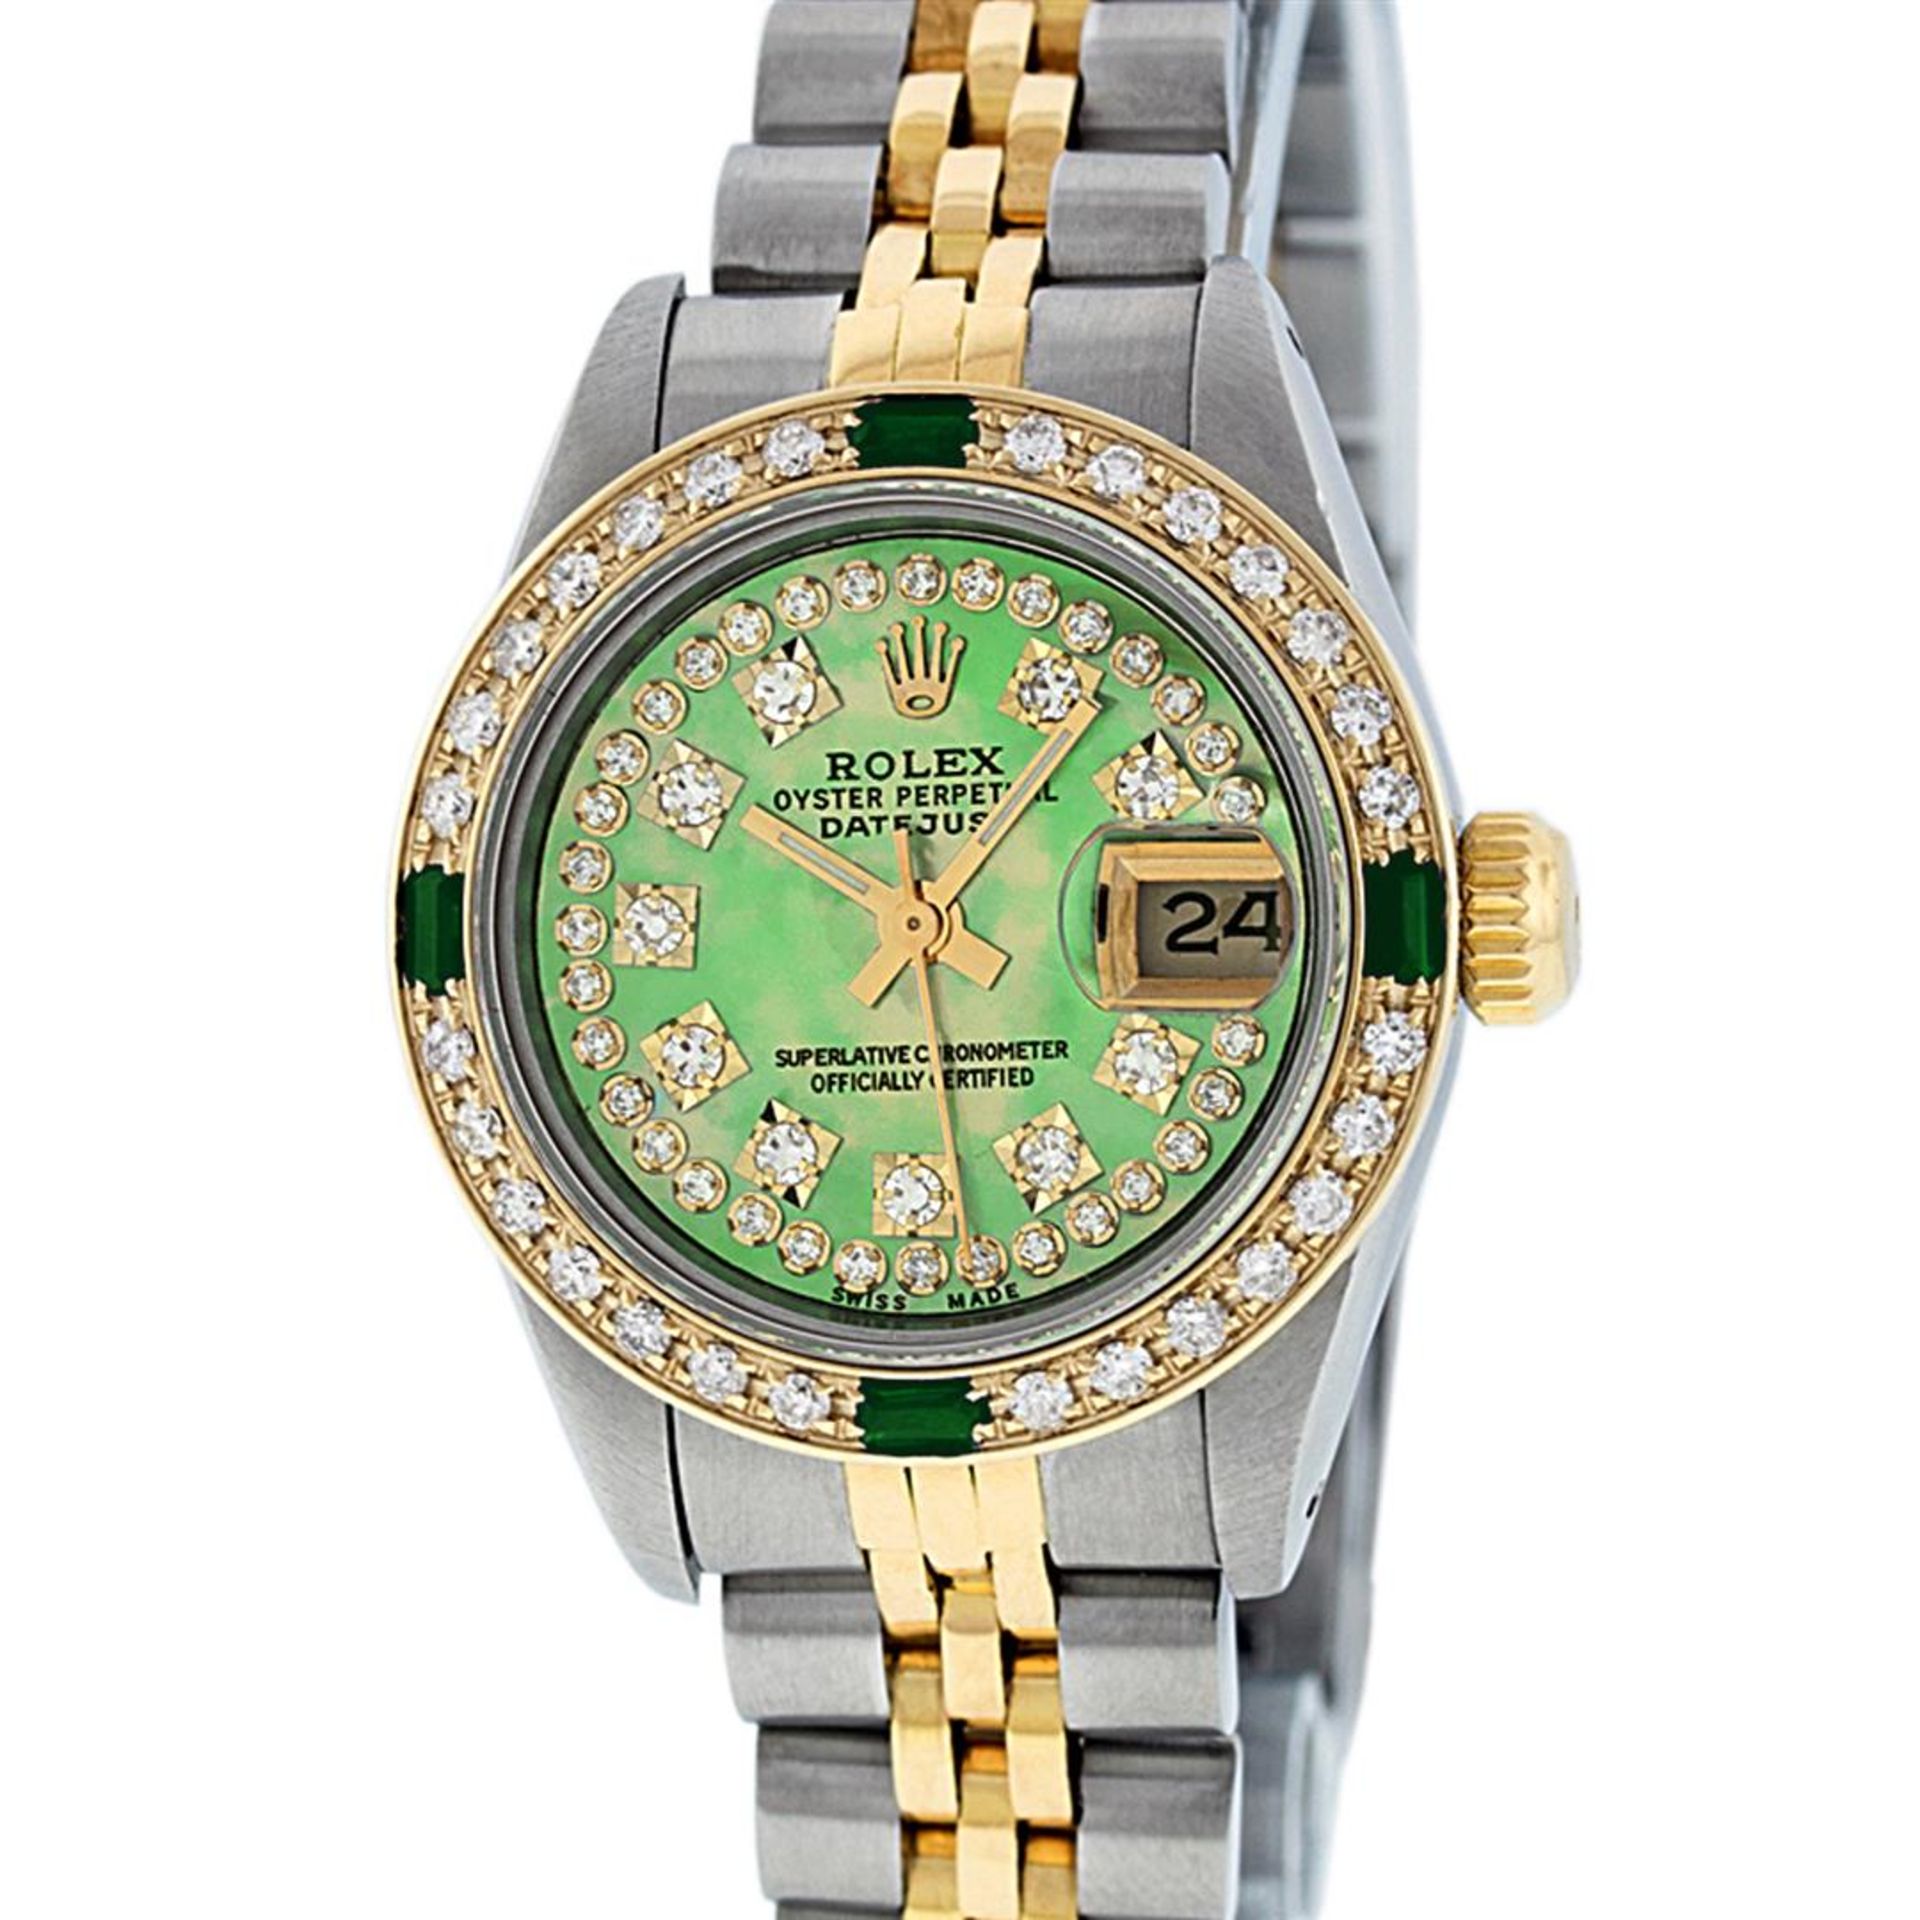 Rolex Ladies 26 Green String Diamond & Emerald Datejust Oyster Perpetual - Image 3 of 9